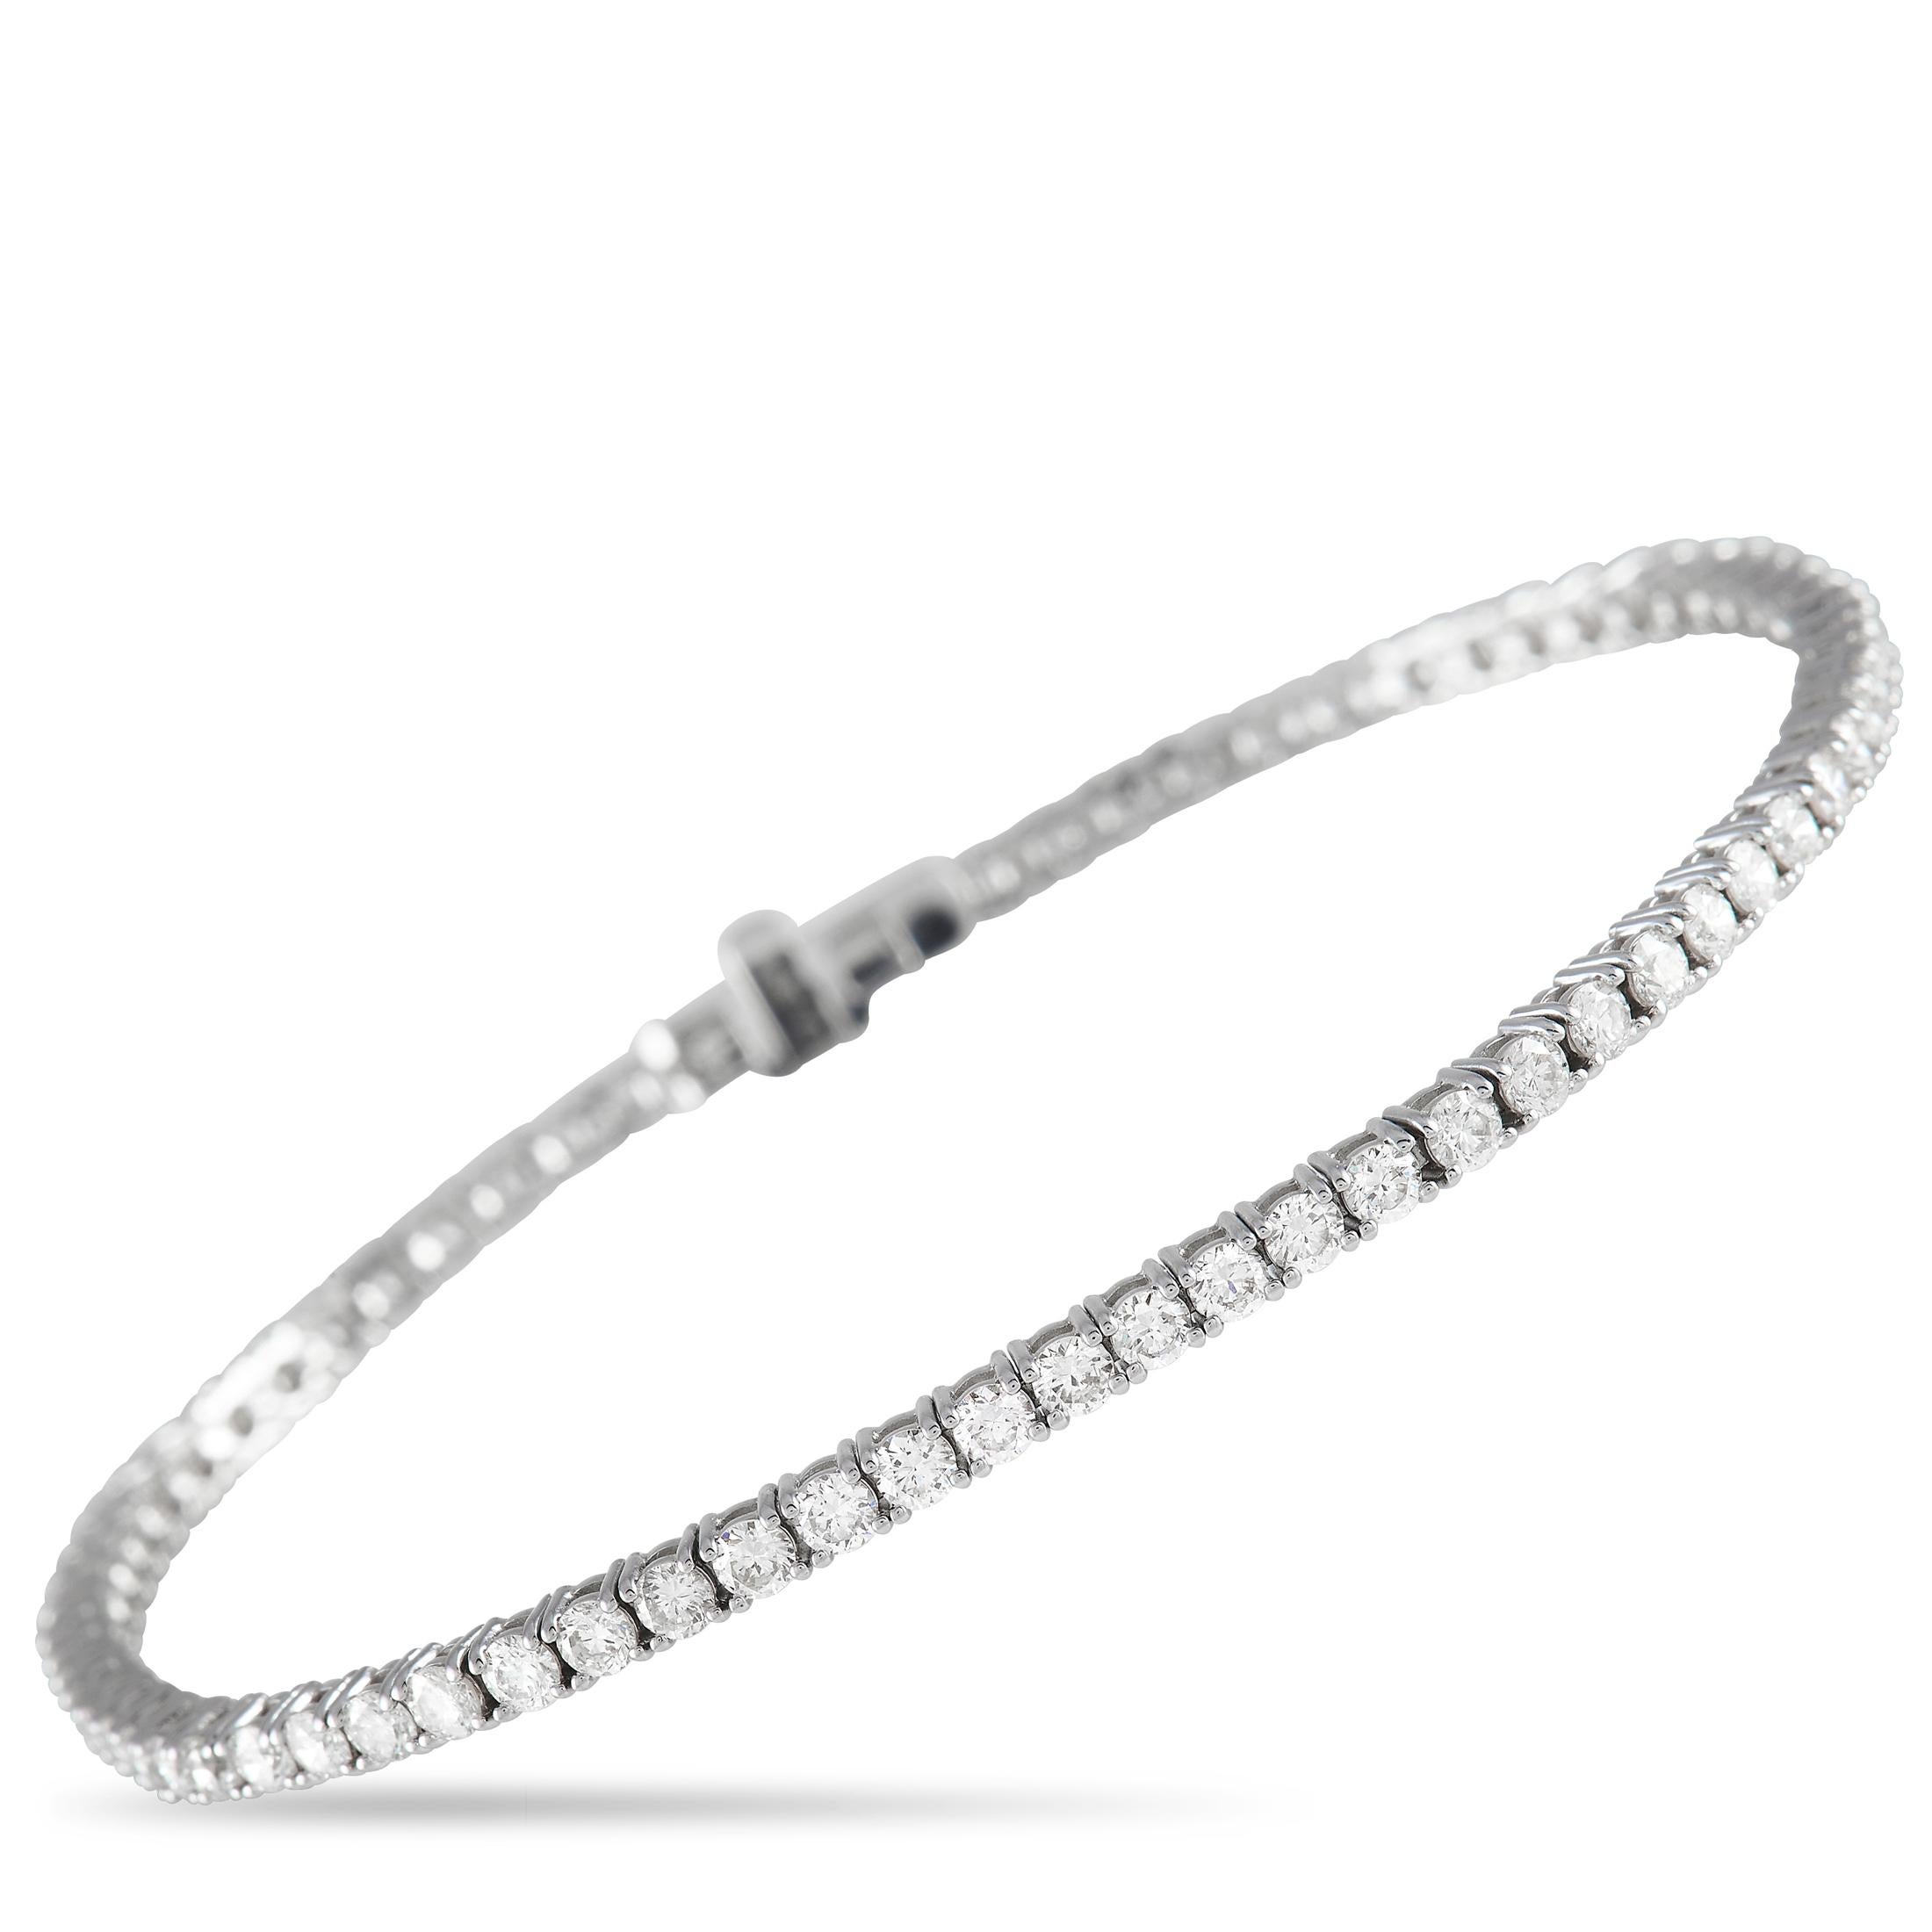 A series of sparkling diamonds totaling 2.45 carats provides this tennis bracelet with its classic sense of elegance. Measuring 7.5” long, this timeless design features an understated 14K White Gold setting that allows the luxurious gemstones to